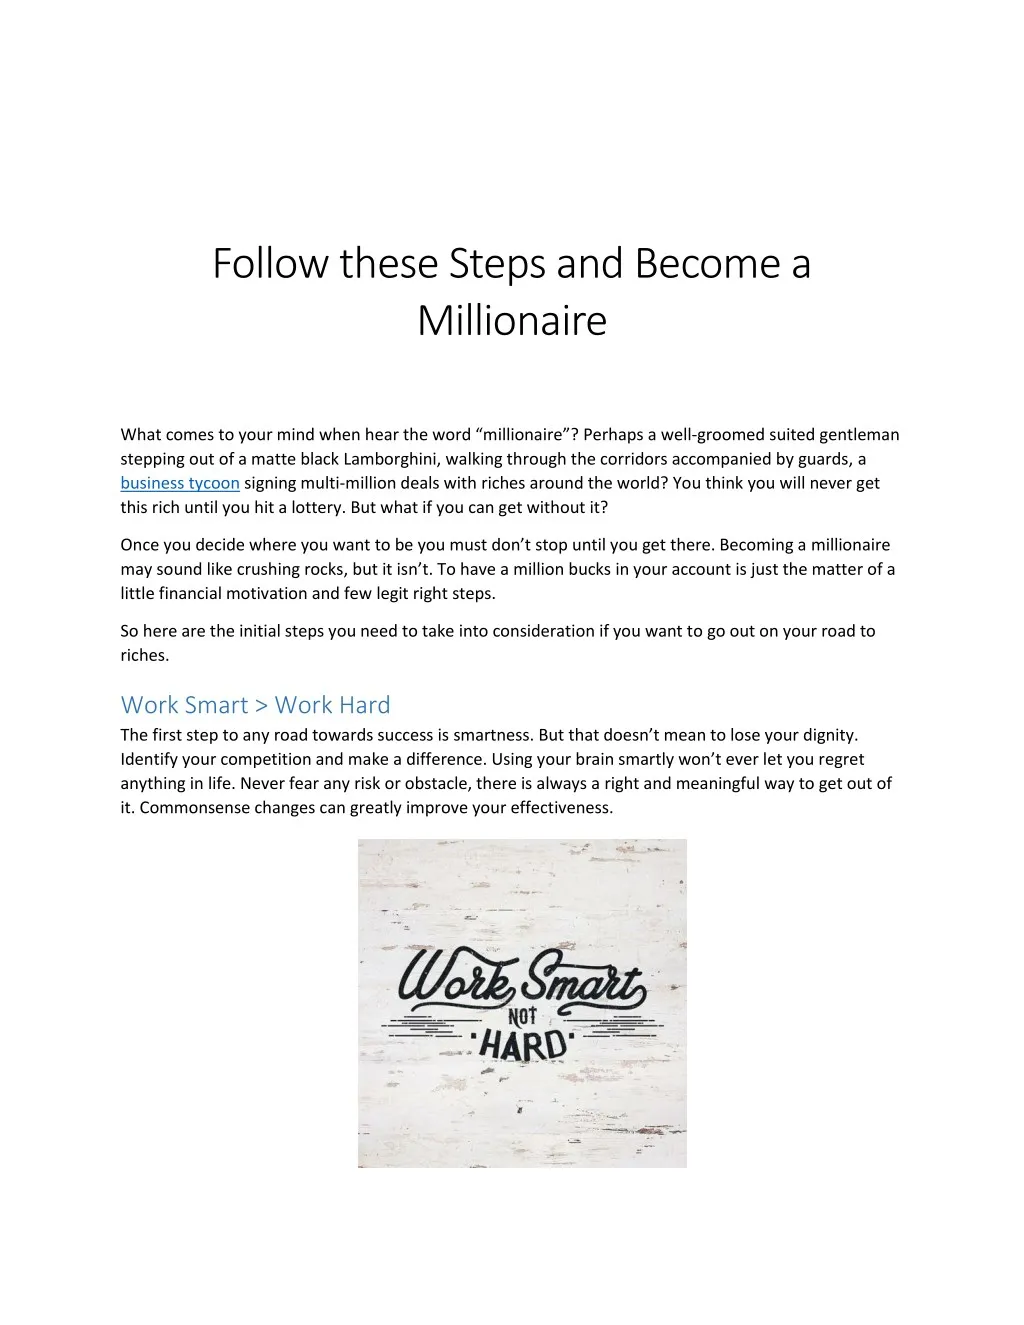 follow these steps and become a millionaire